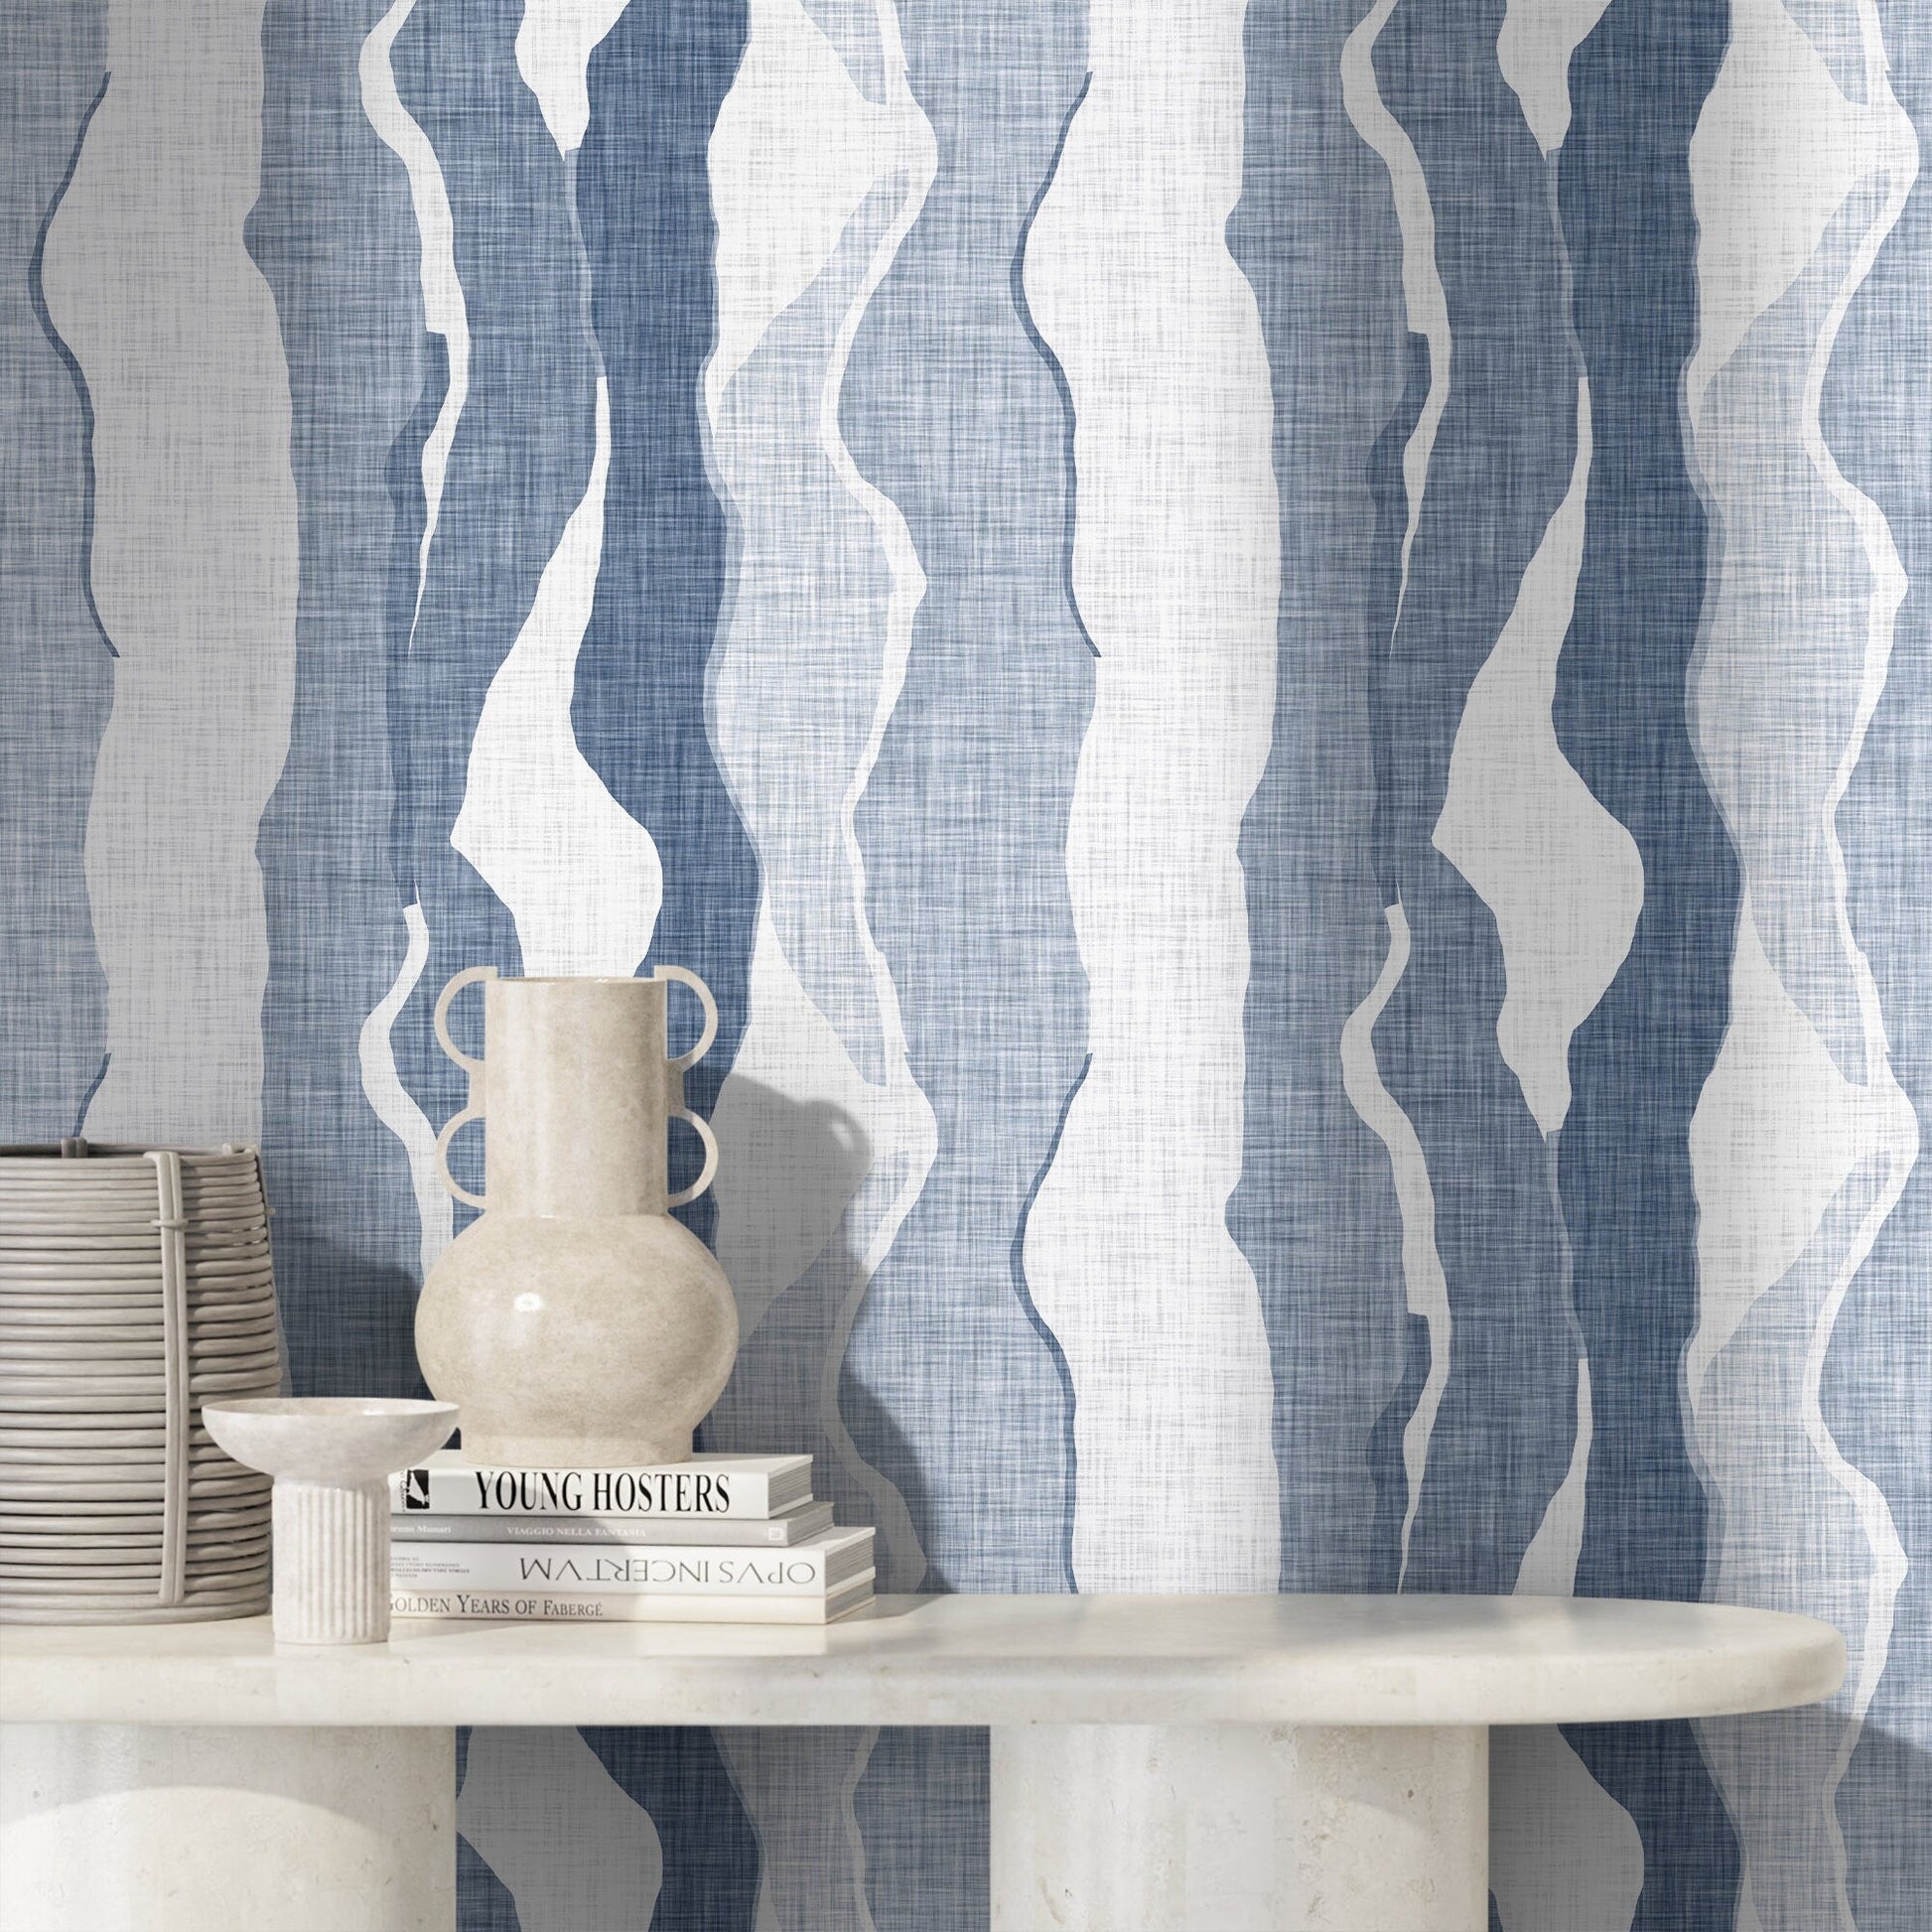 Blue Abstract Waves Wallpaper Modern Wallpaper Peel and Stick and Traditional Wallpaper - D837